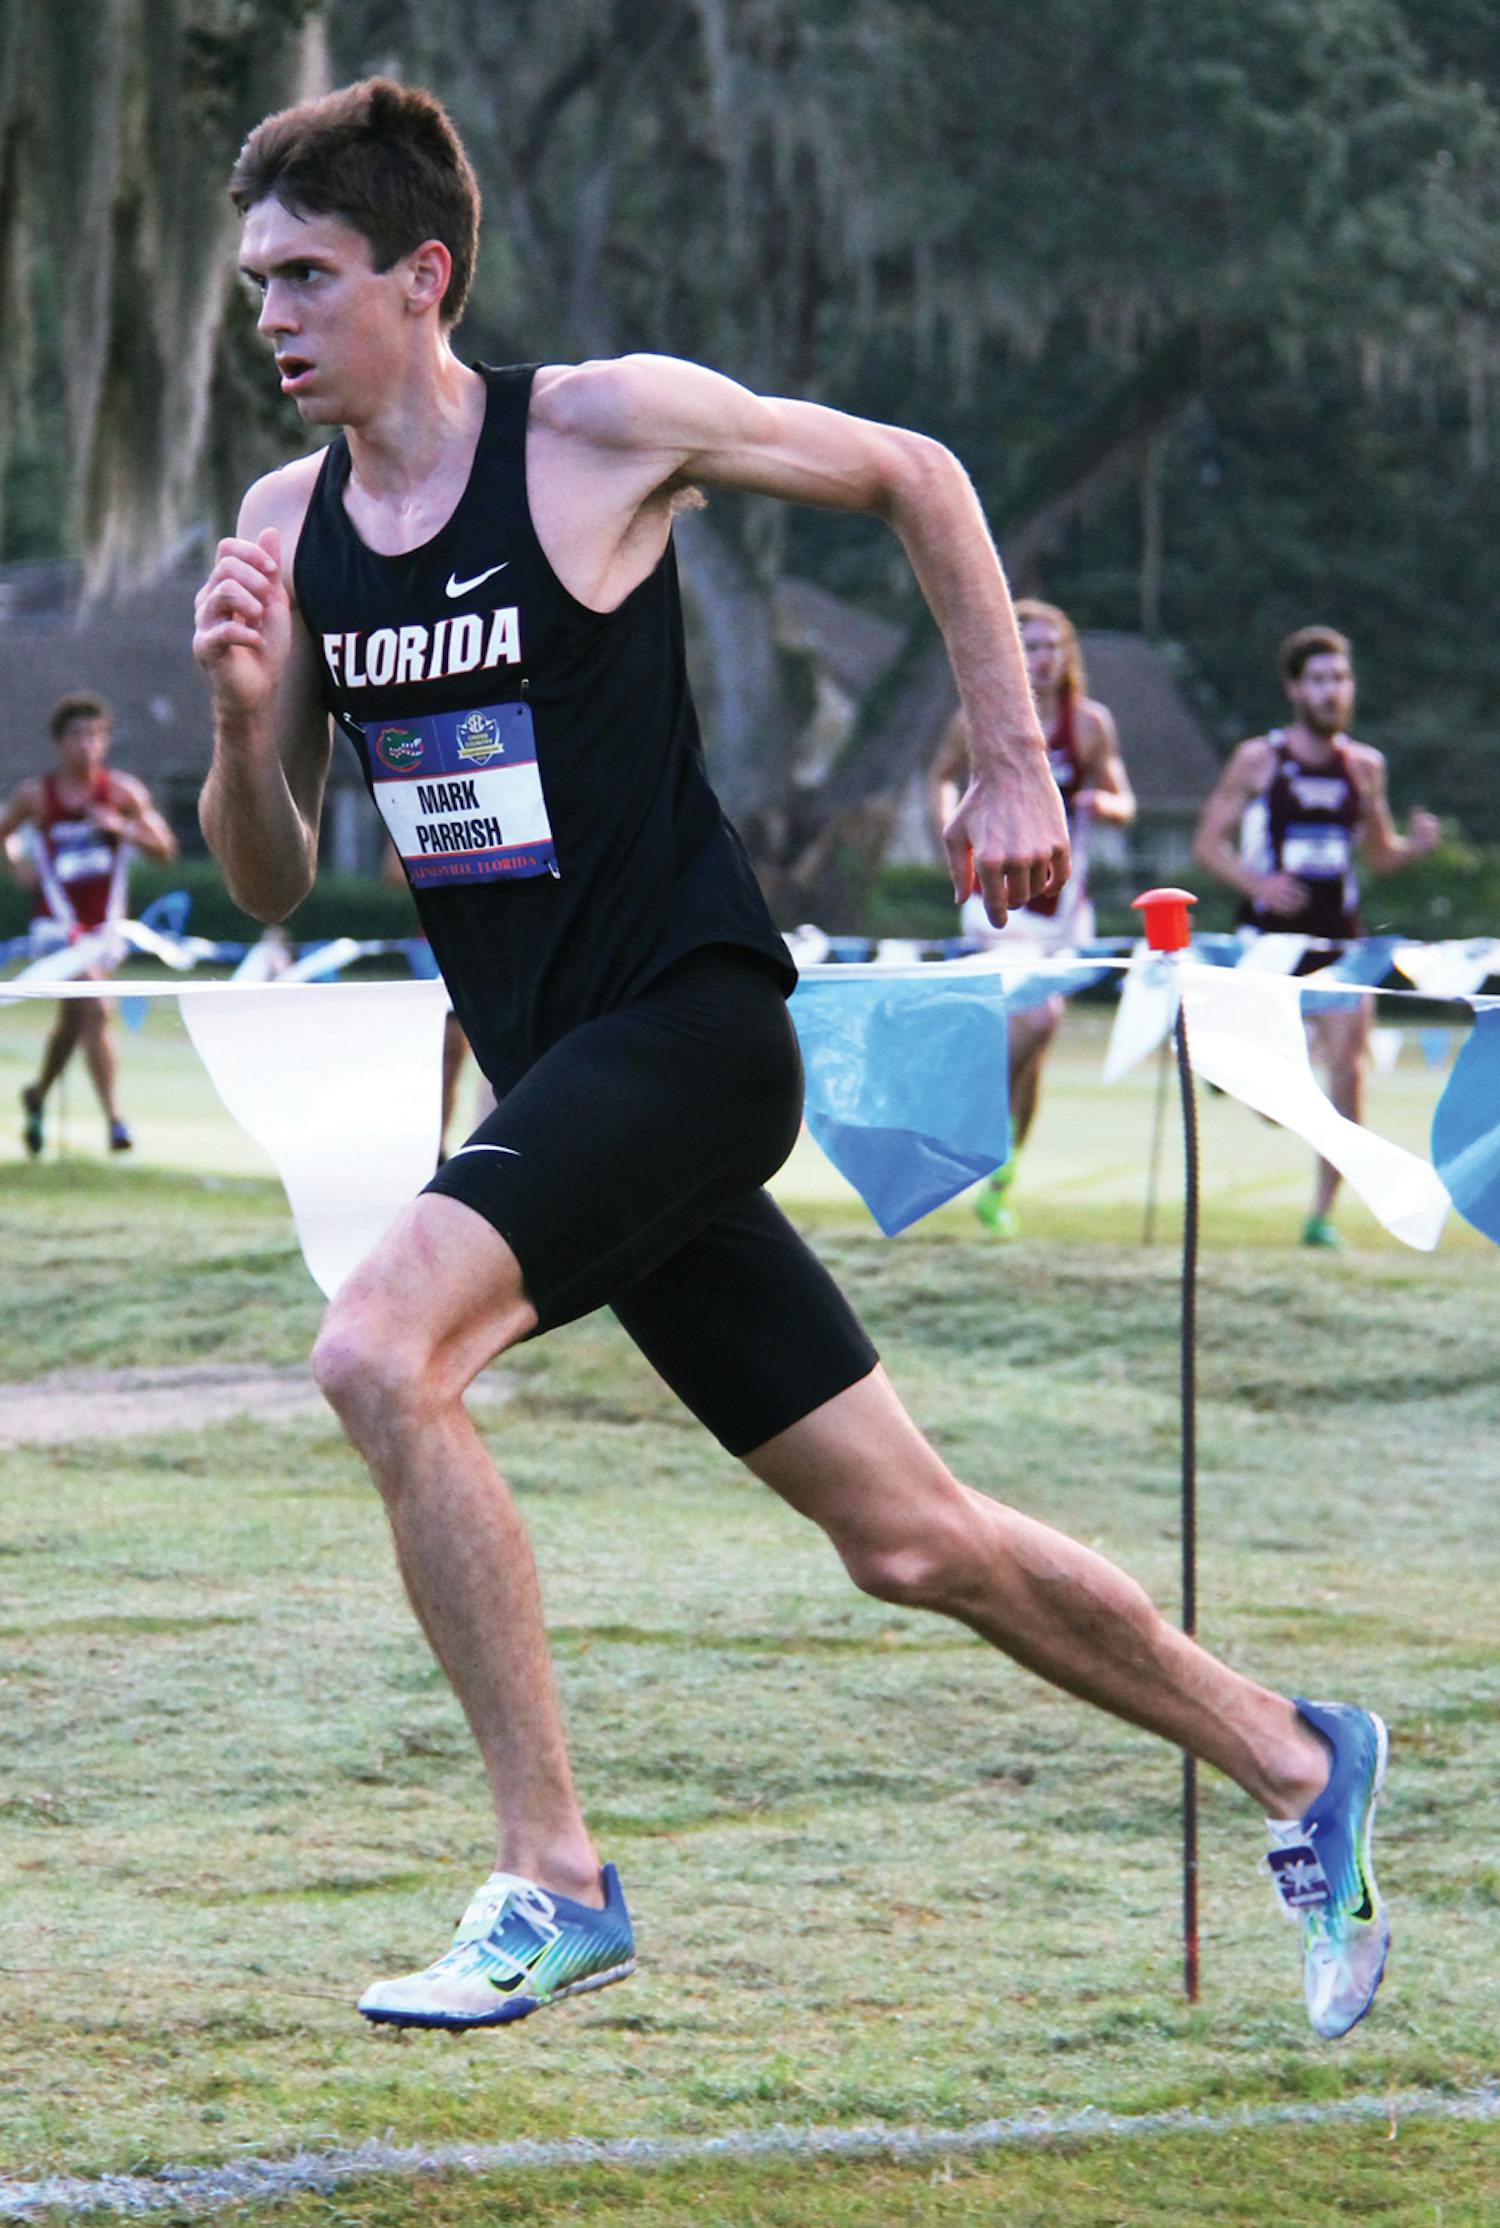 Mark Parrish runs in the Southeastern Conference Championship on Nov. 1, 2013 at the Mark Bostick Golf Course in Gainesville.